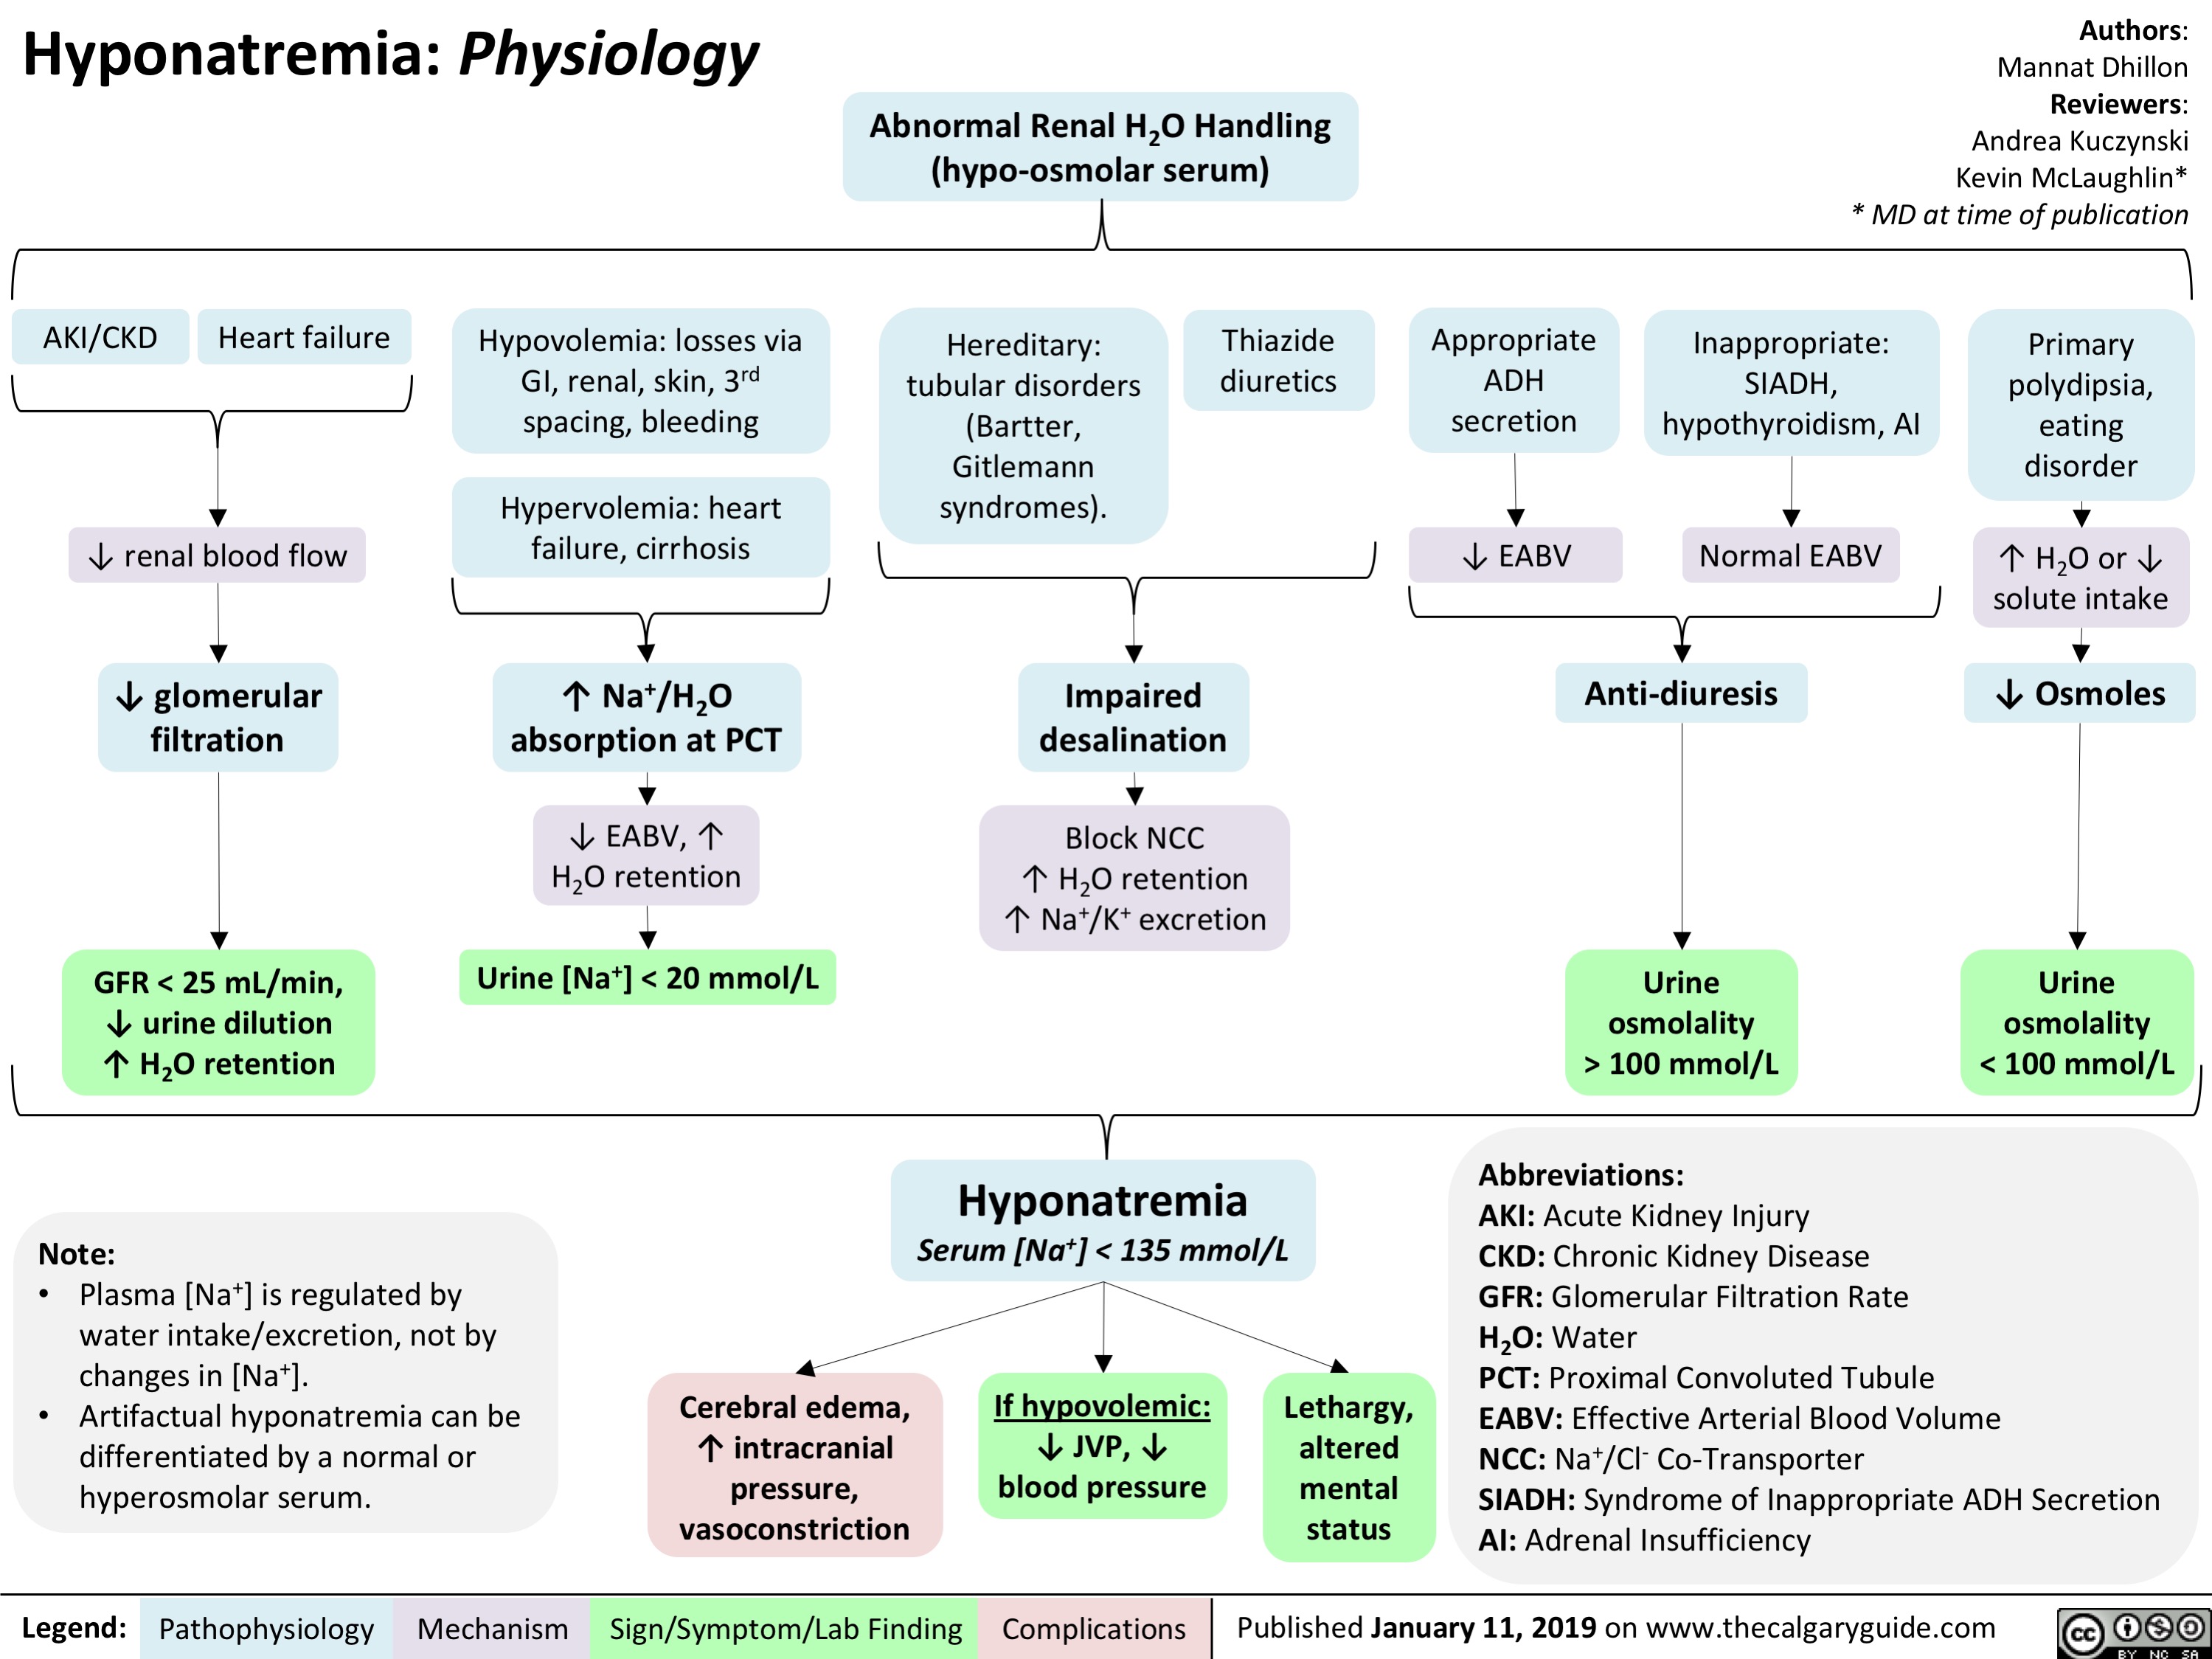 Hyponatremia: Physiology
Authors: Mannat Dhillon Reviewers: Andrea Kuczynski Kevin McLaughlin* * MD at time of publication
 Abnormal Renal H2O Handling (hypo-osmolar serum)
         AKI/CKD Heart failure
↓ renal blood flow
↓ glomerular filtration
GFR < 25 mL/min, ↓ urine dilution ↑ H2O retention
Note:
• Plasma [Na+] is regulated by water intake/excretion, not by changes in [Na+].
• Artifactual hyponatremia can be differentiated by a normal or hyperosmolar serum.
Appropriate ADH secretion
↓ EABV
Hypovolemia: losses via GI, renal, skin, 3rd spacing, bleeding
Hypervolemia: heart failure, cirrhosis
↑ Na+/H2O absorption at PCT
↓ EABV, ↑ H2O retention
Urine [Na+] < 20 mmol/L
Hereditary: tubular disorders
(Bartter, Gitlemann syndromes).
Thiazide diuretics
Inappropriate: SIADH, hypothyroidism, AI
Normal EABV
Anti-diuresis
Primary polydipsia, eating disorder
↑ H2O or ↓ solute intake
↓ Osmoles
                       Impaired desalination
Block NCC
↑ H2O retention ↑ Na+/K+ excretion
Hyponatremia
Serum [Na+] < 135 mmol/L
Urine osmolality > 100 mmol/L
Urine osmolality < 100 mmol/L
                     Cerebral edema, ↑ intracranial pressure, vasoconstriction
If hypovolemic: ↓ JVP, ↓ blood pressure
Lethargy, altered mental status
Abbreviations:
AKI: Acute Kidney Injury
CKD: Chronic Kidney Disease
GFR: Glomerular Filtration Rate
H2O: Water
PCT: Proximal Convoluted Tubule
EABV: Effective Arterial Blood Volume
NCC: Na+/Cl- Co-Transporter
SIADH: Syndrome of Inappropriate ADH Secretion AI: Adrenal Insufficiency
  Legend:
 Pathophysiology
 Mechanism
Sign/Symptom/Lab Finding
  Complications
Published January 11, 2019 on www.thecalgaryguide.com
   